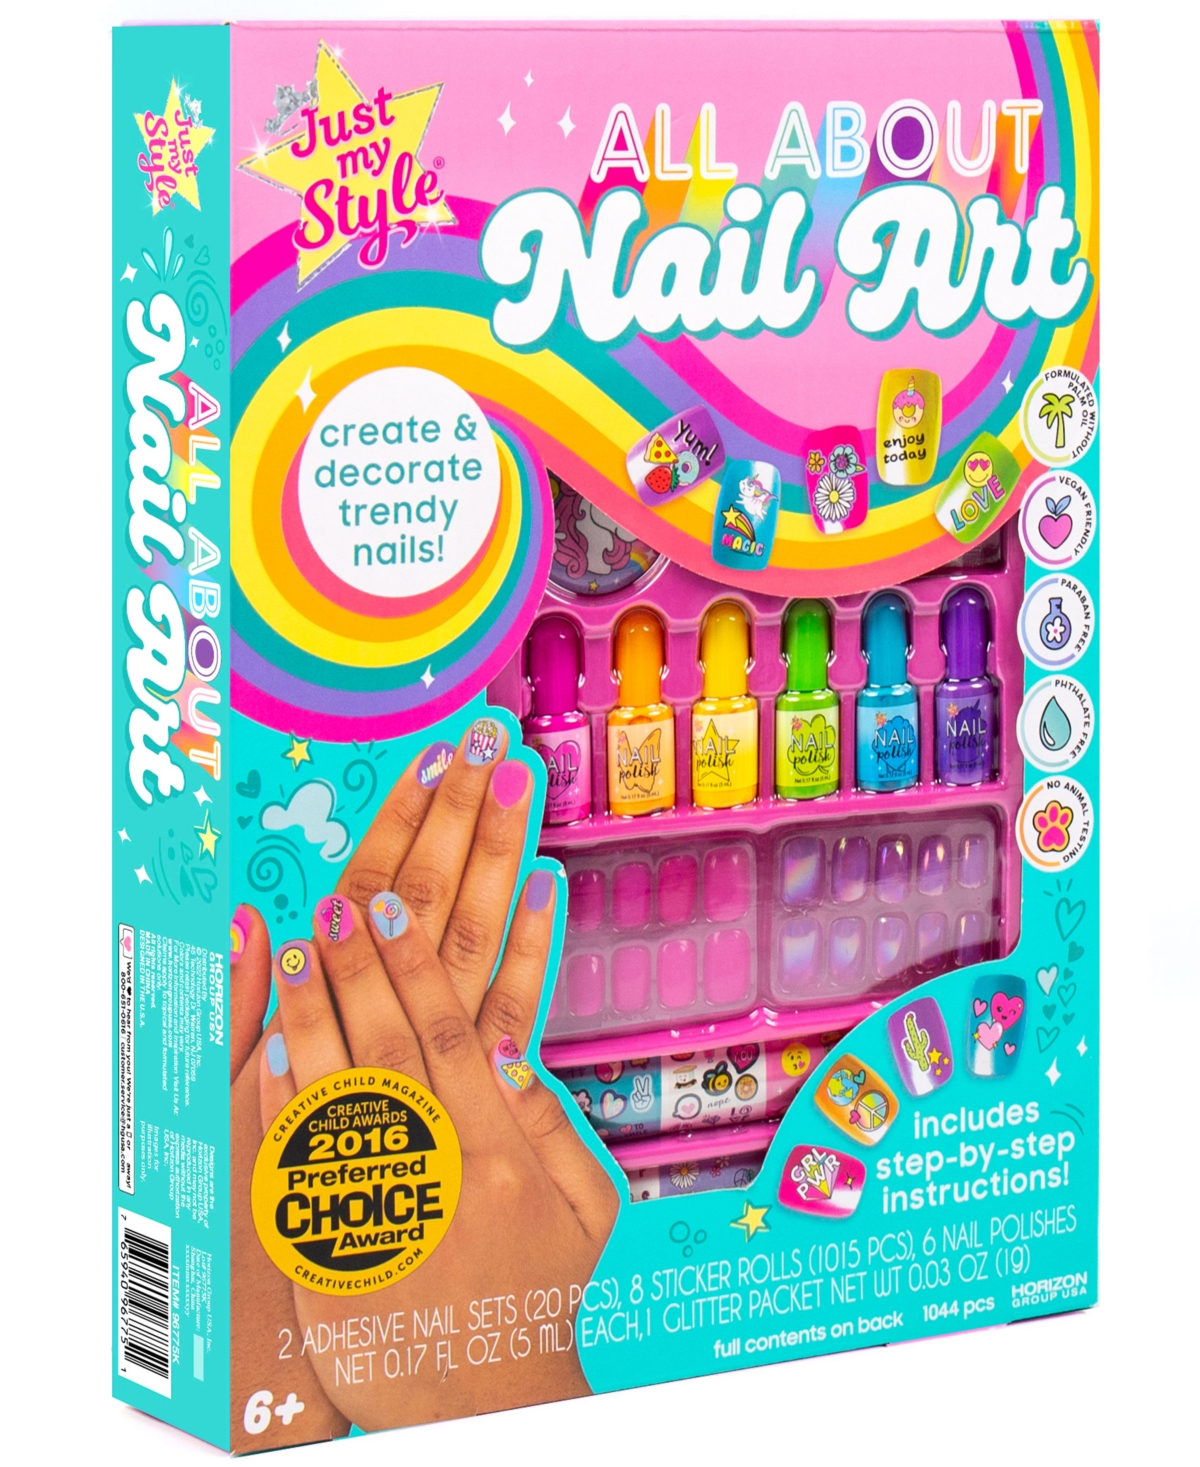 All About Nail Art Playset - Multi